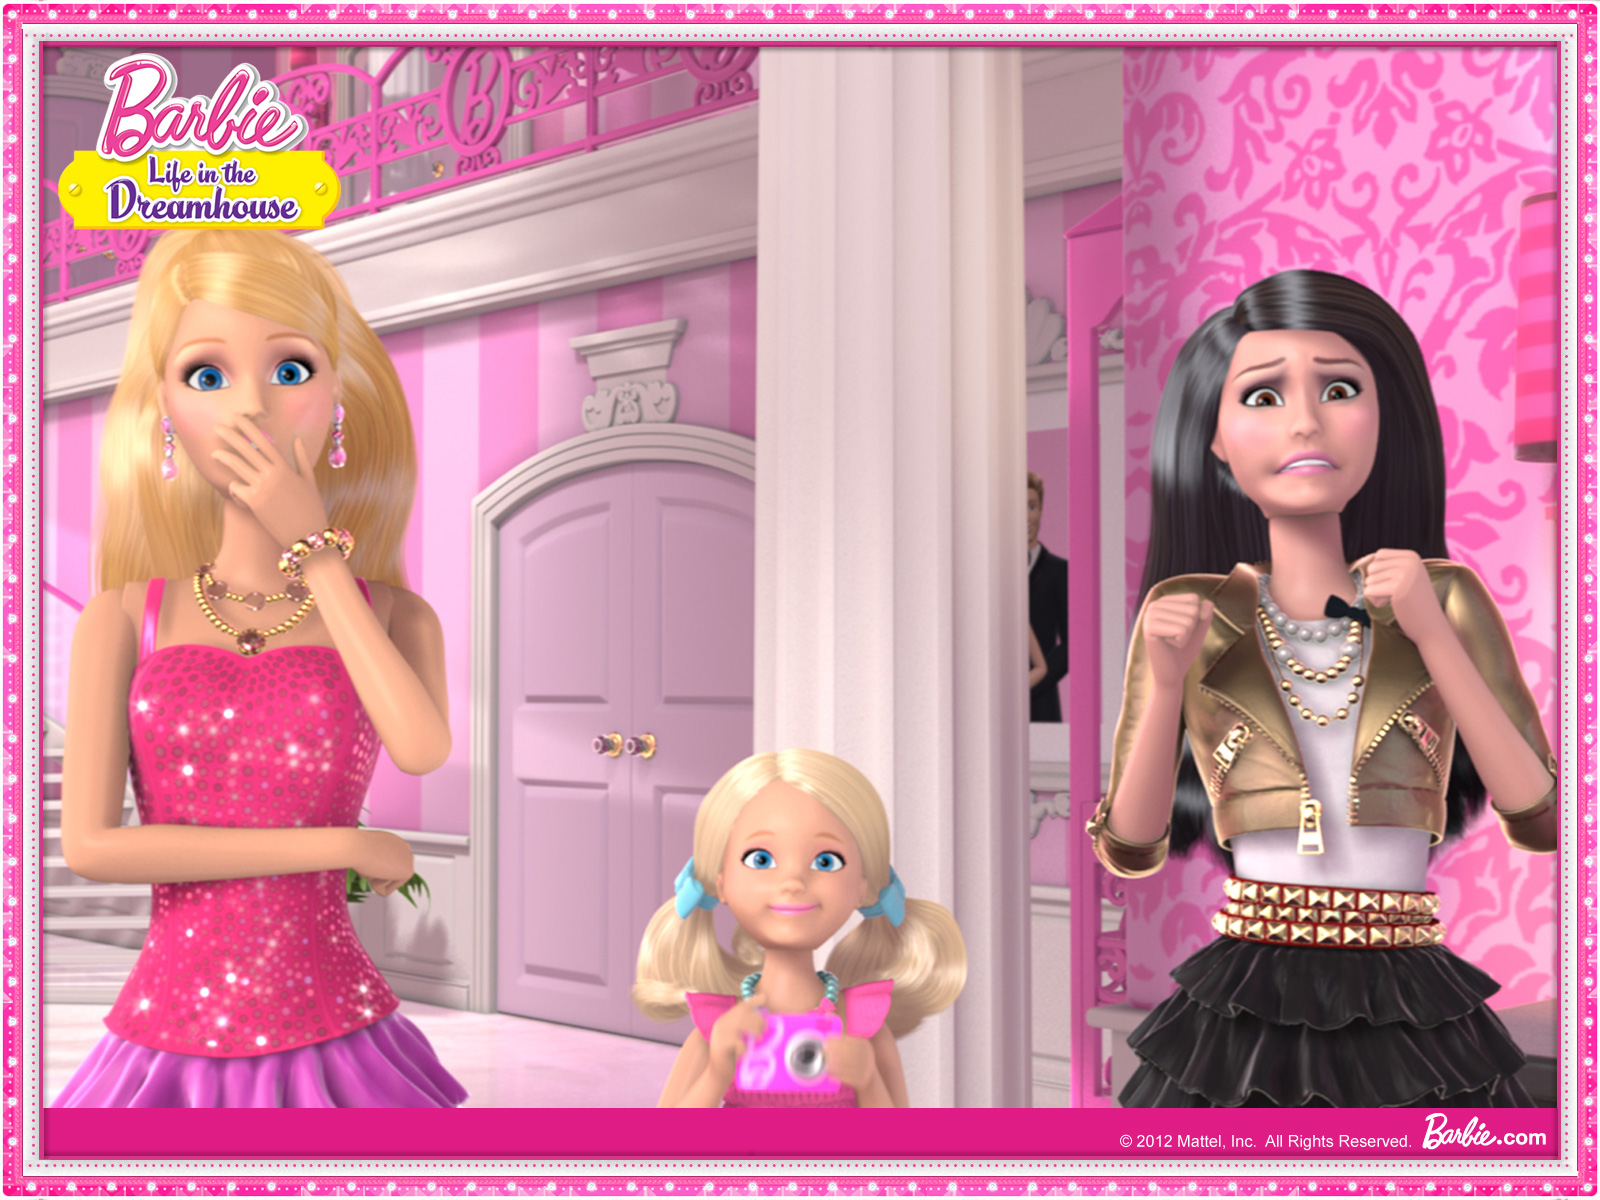 Barbie Life in the Dreamhouse   Barbie Movies Photo 30844792 1600x1200